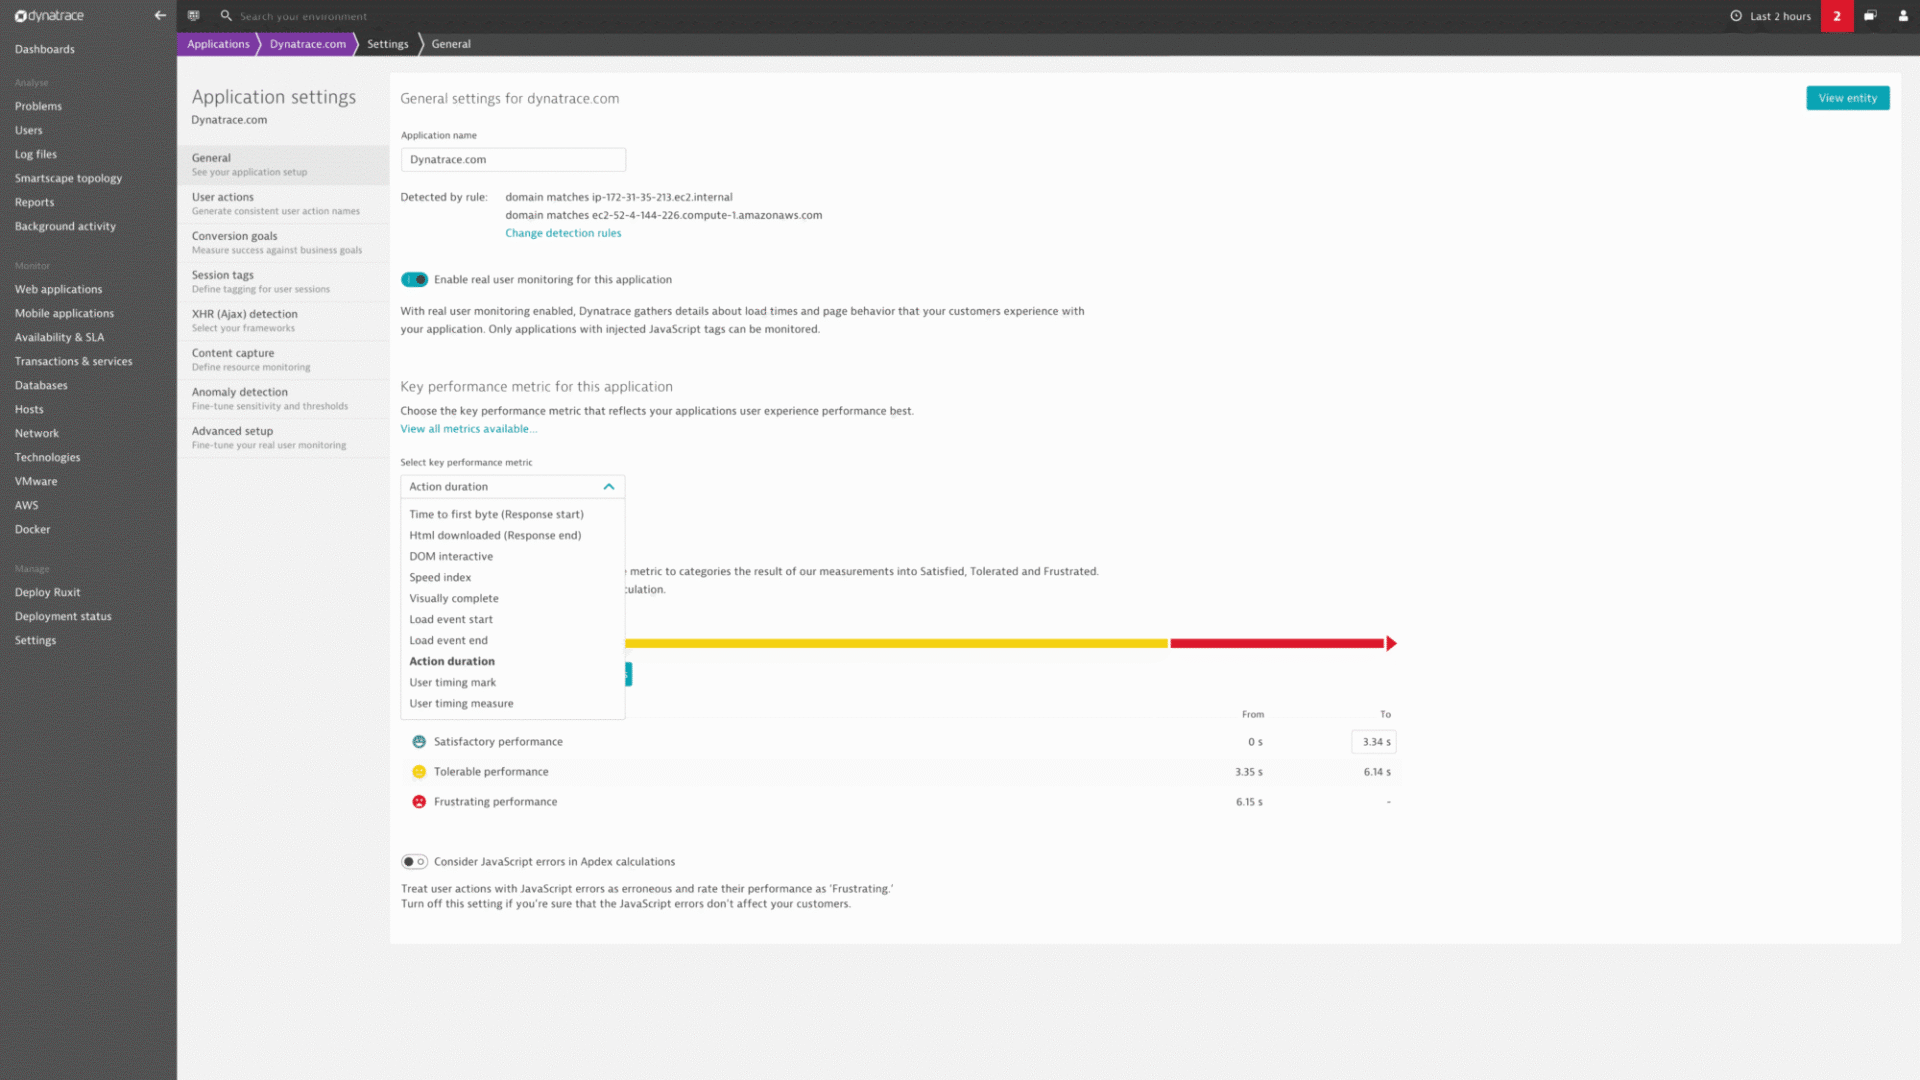 Application settings to select key performance metric in Dynatrace screenshot